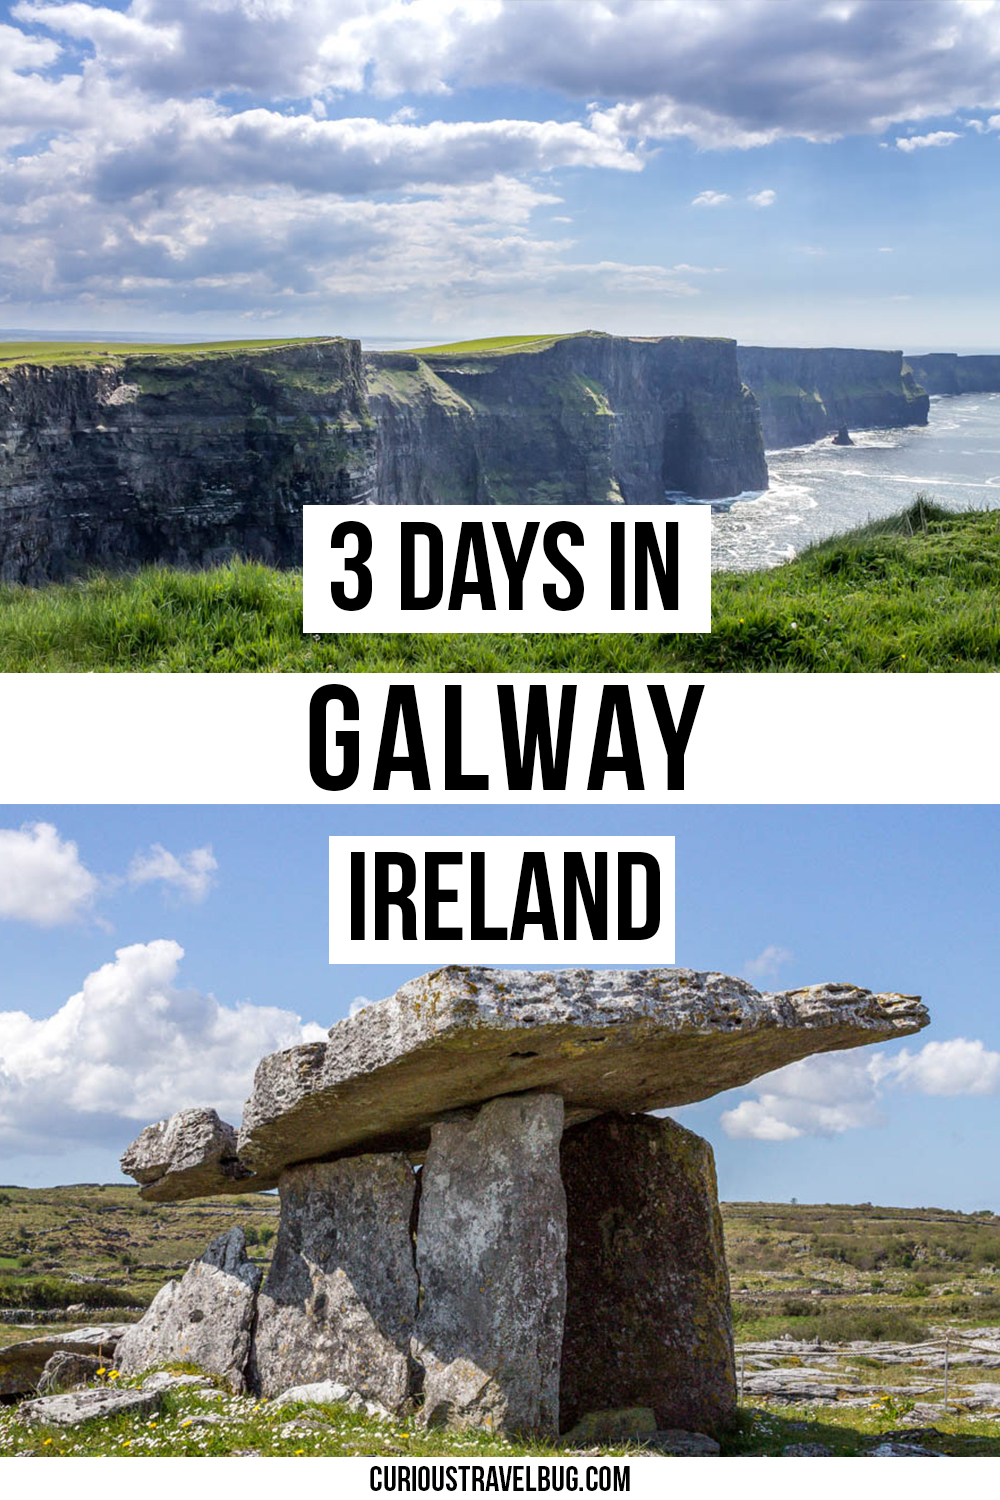 Everything you need to know to have a fantastic vacation to Galway Ireland. This 3 day itinerary to Galway covers where to sleep in Galway, what to see in Galway, what to eat in Galway as well as the best day trips from Galway including Cliffs of Moher and Connemara National Park Ireland. |Galway Ireland | Salthill | Day trips from Galway | What to do in Galway